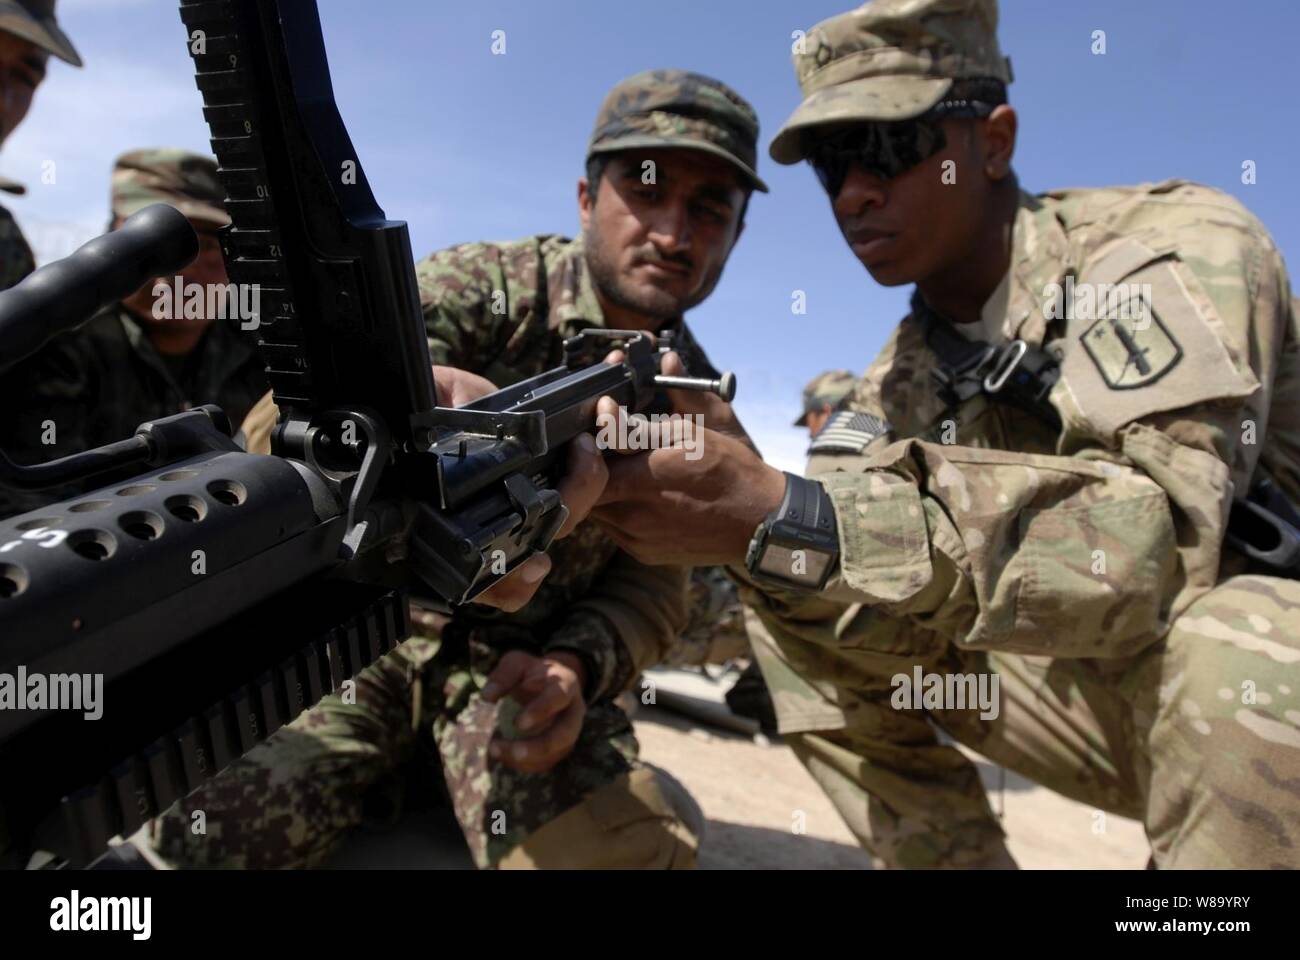 U.S. Army Pfc. Jeremiah Jones (right), with Bravo Company, 3rd Battalion, 4th Infantry Regiment, 170th Infantry Brigade, shows an Afghan National Army recruit how to disassemble a M240B machine gun during weapons training at Basic Warrior Training at Regional Military Training Center, Kandahar province, Afghanistan, on Feb. 22, 2011.  The recruits performed basic maintenance skills on these weapons before taking them to a weapons range. Stock Photo